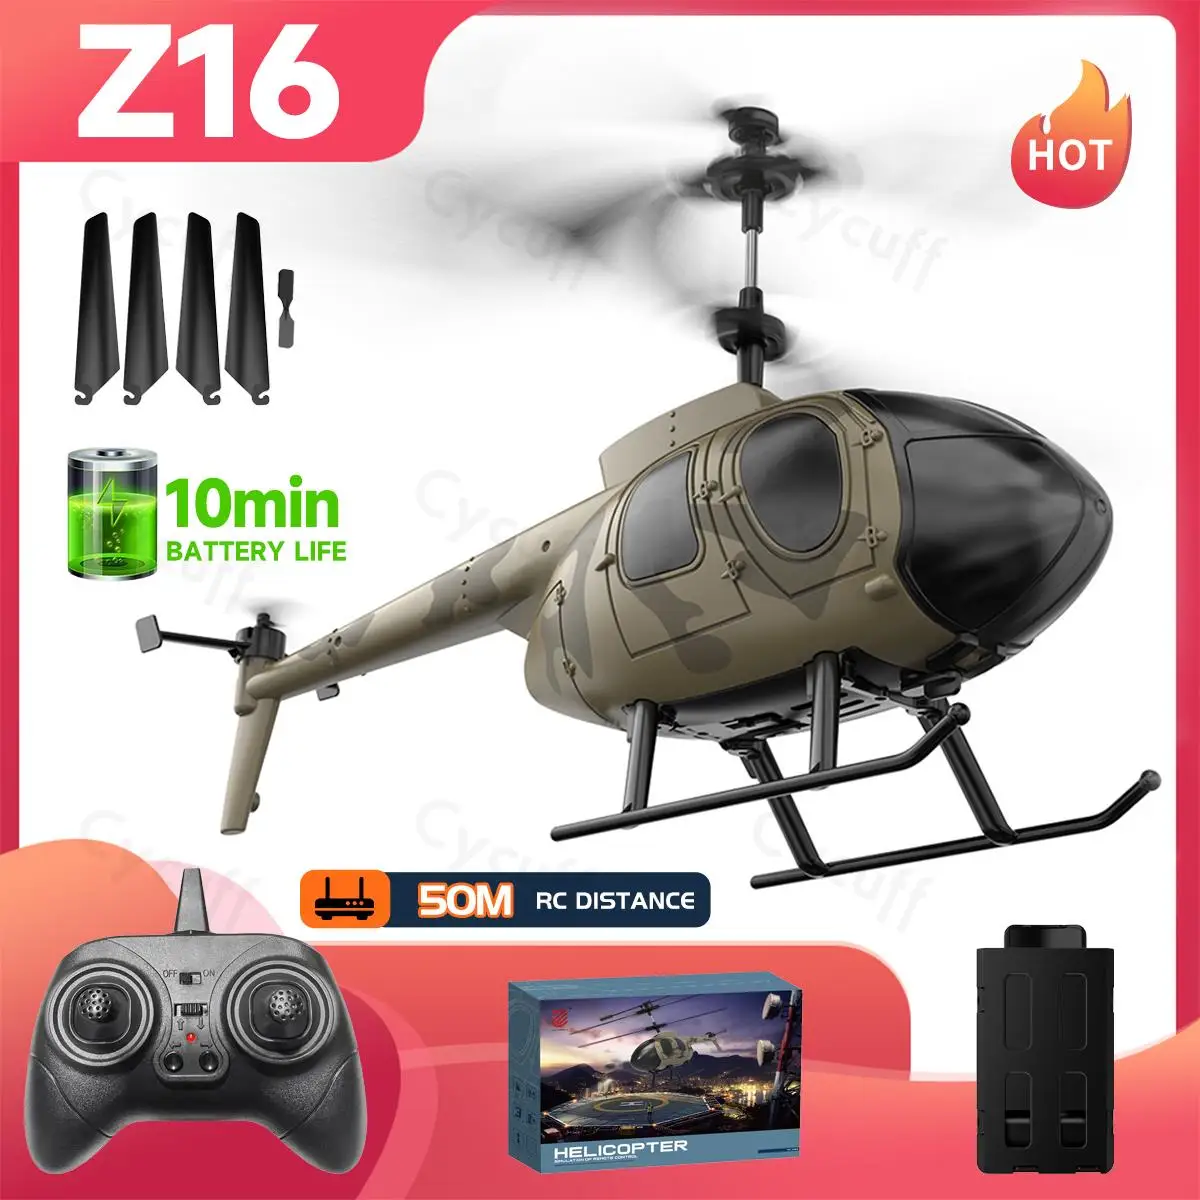 2023 New Z16 RC Helicopter 3.5CH 2.4G Radio Control Plane Hold Air Pressure - $51.80+